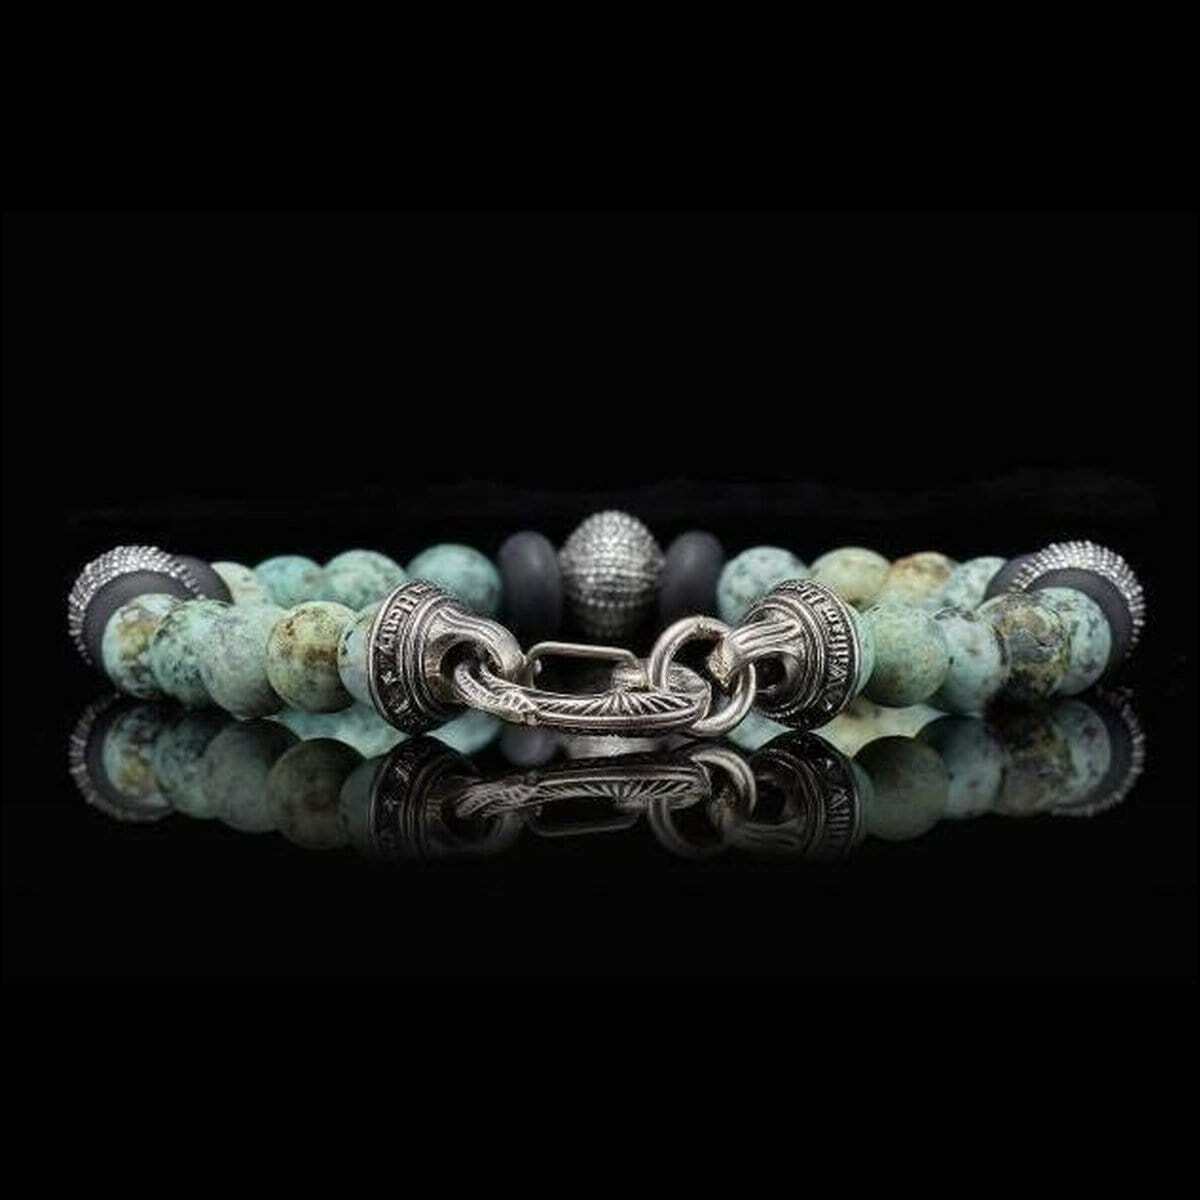 William Henry Bracelet with African Turquoise and Onyx